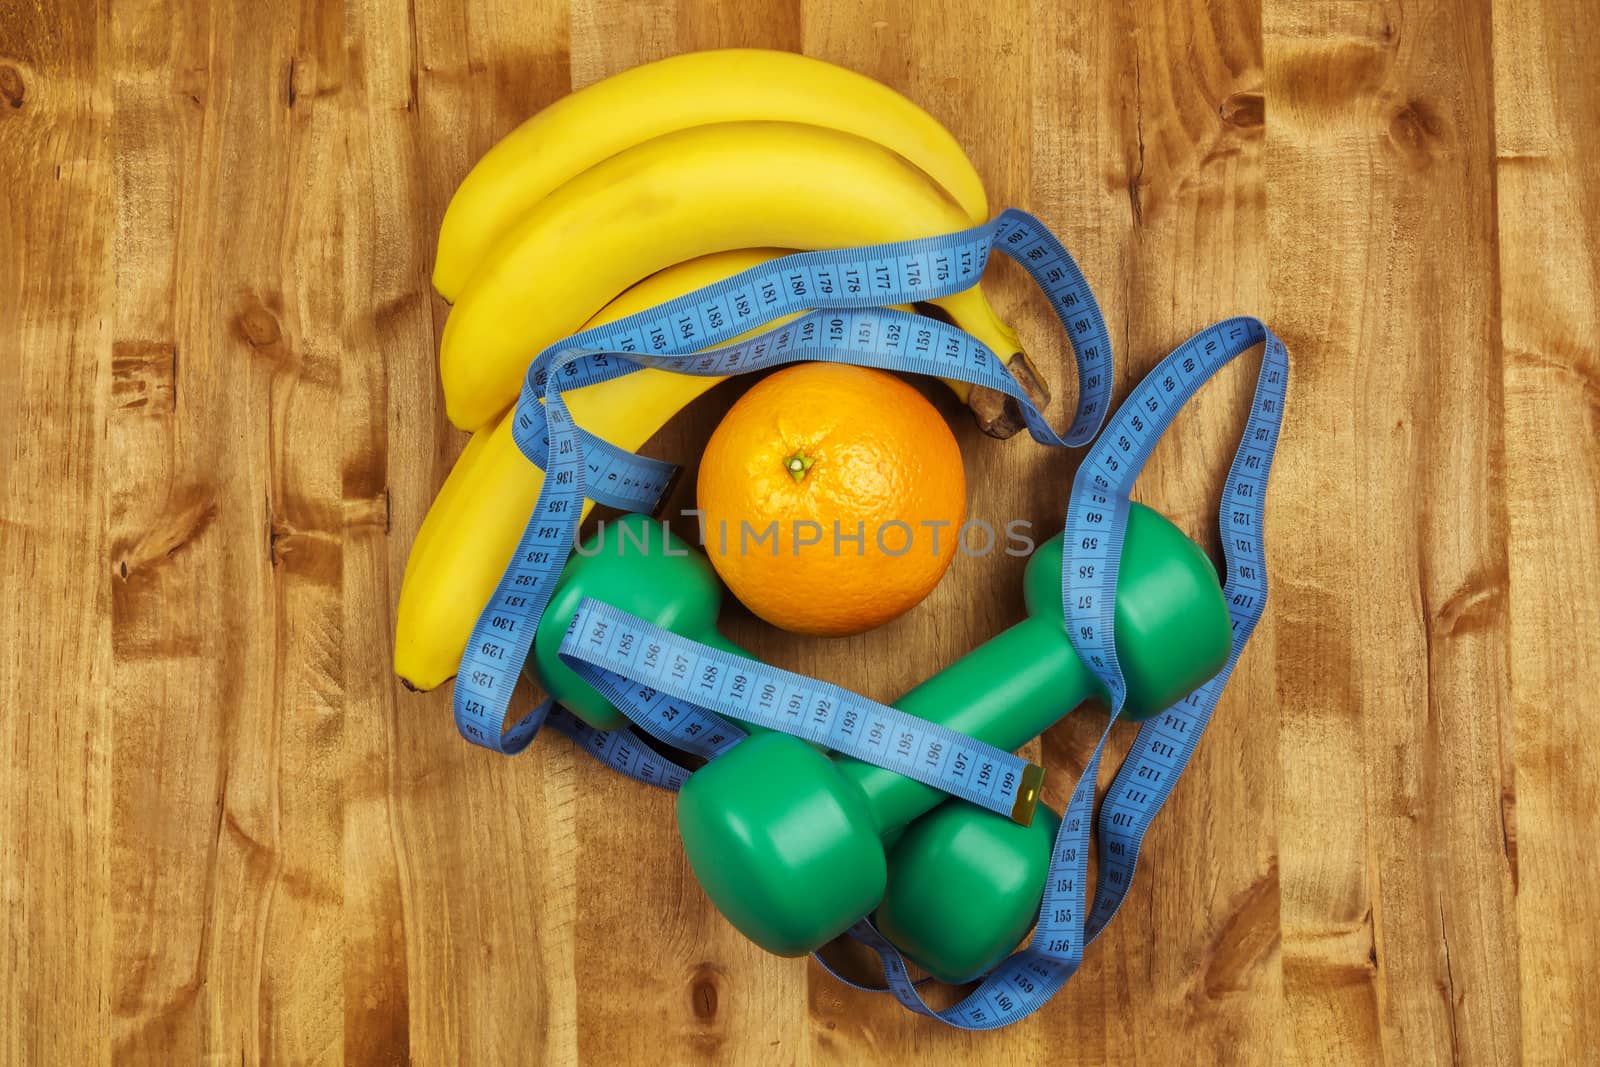 On the wooden surface are two dumbbells, centimeter, bananas and orange